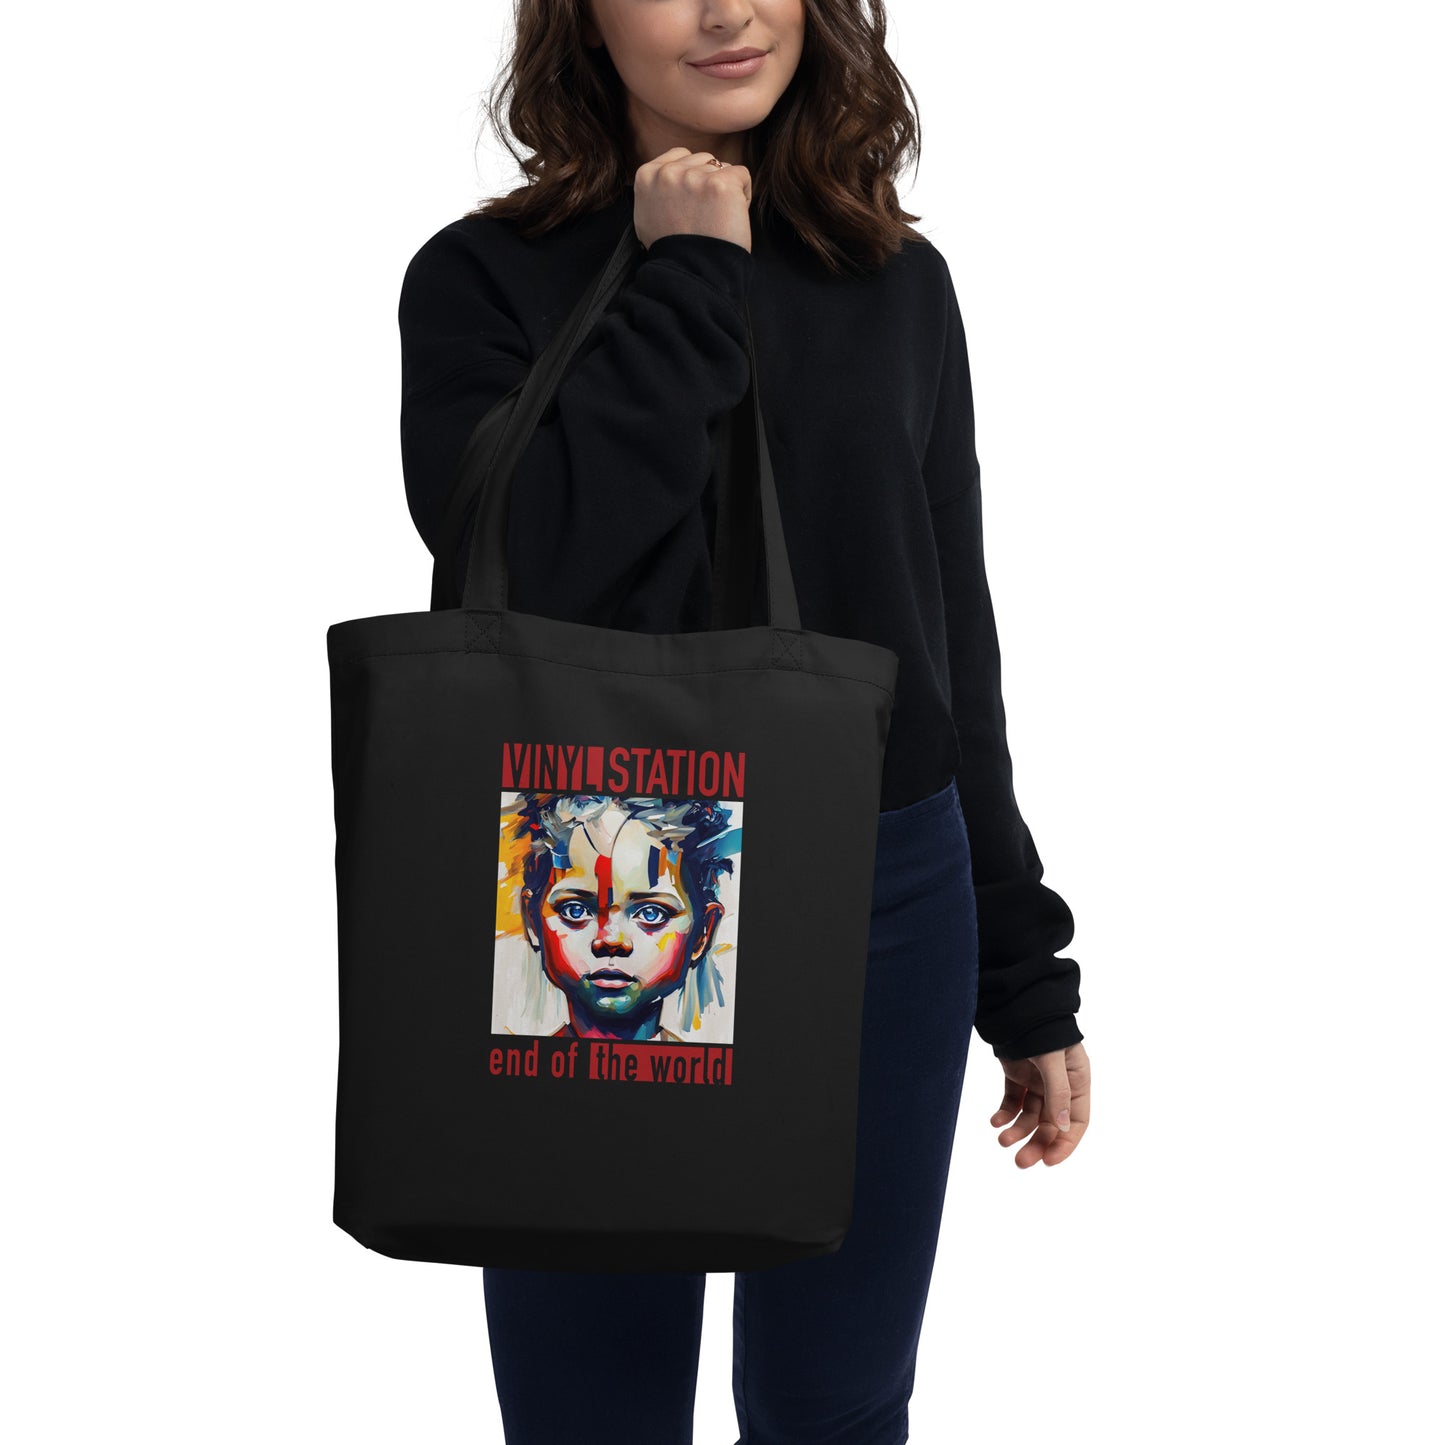 Vinyl Station - Eco Tote Bag - End of the World